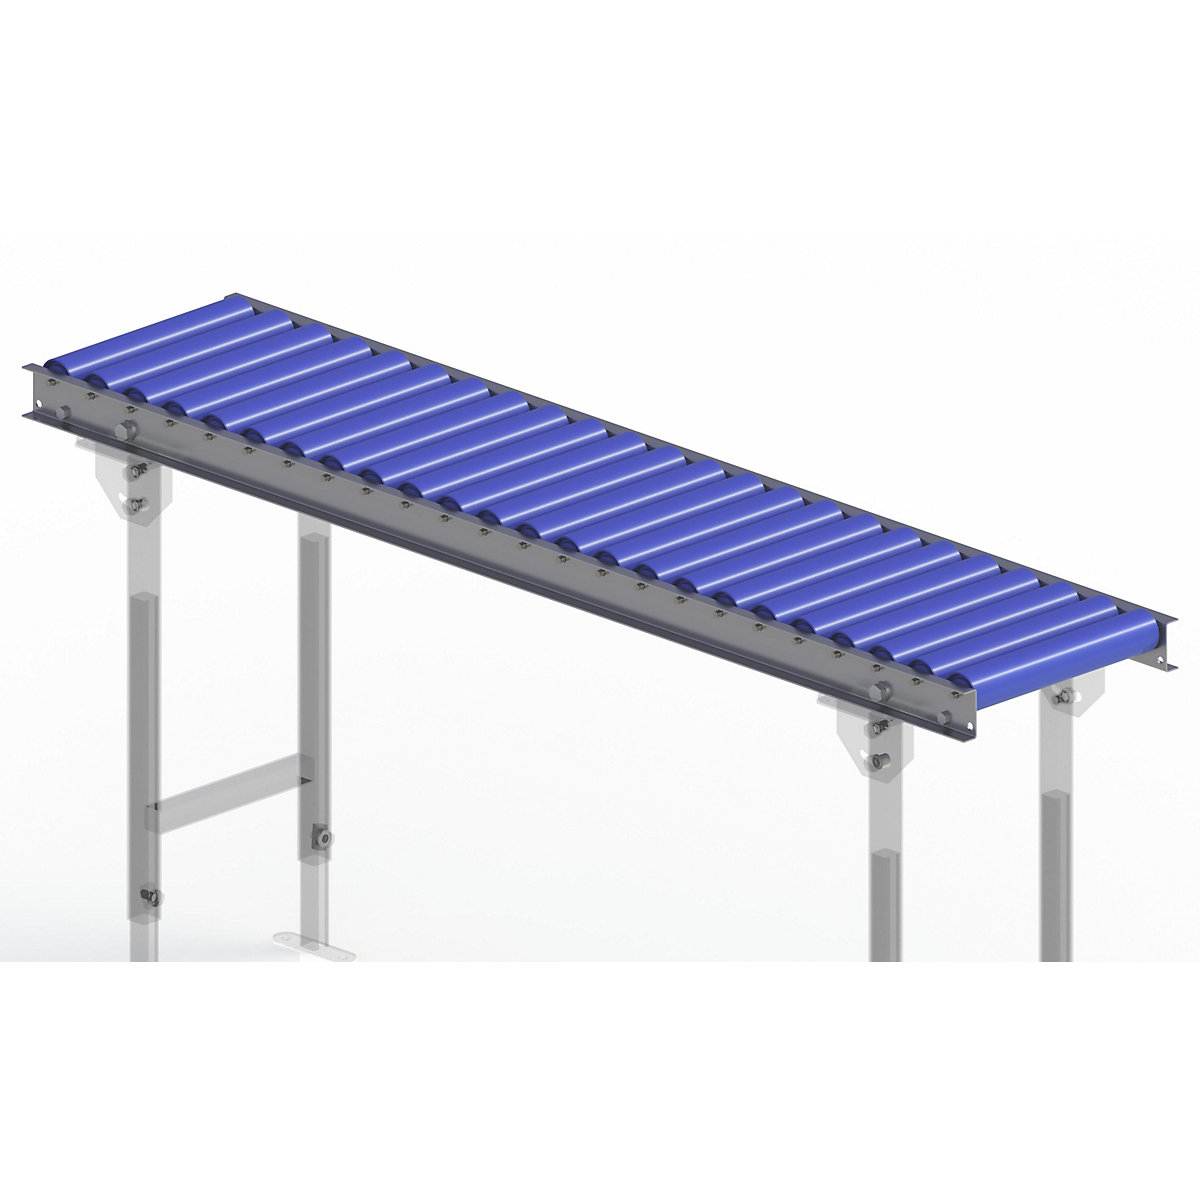 Gura – Light duty roller conveyor, steel frame with plastic rollers, track width 300 mm, axle spacing 62.5 mm, length 1.5 m